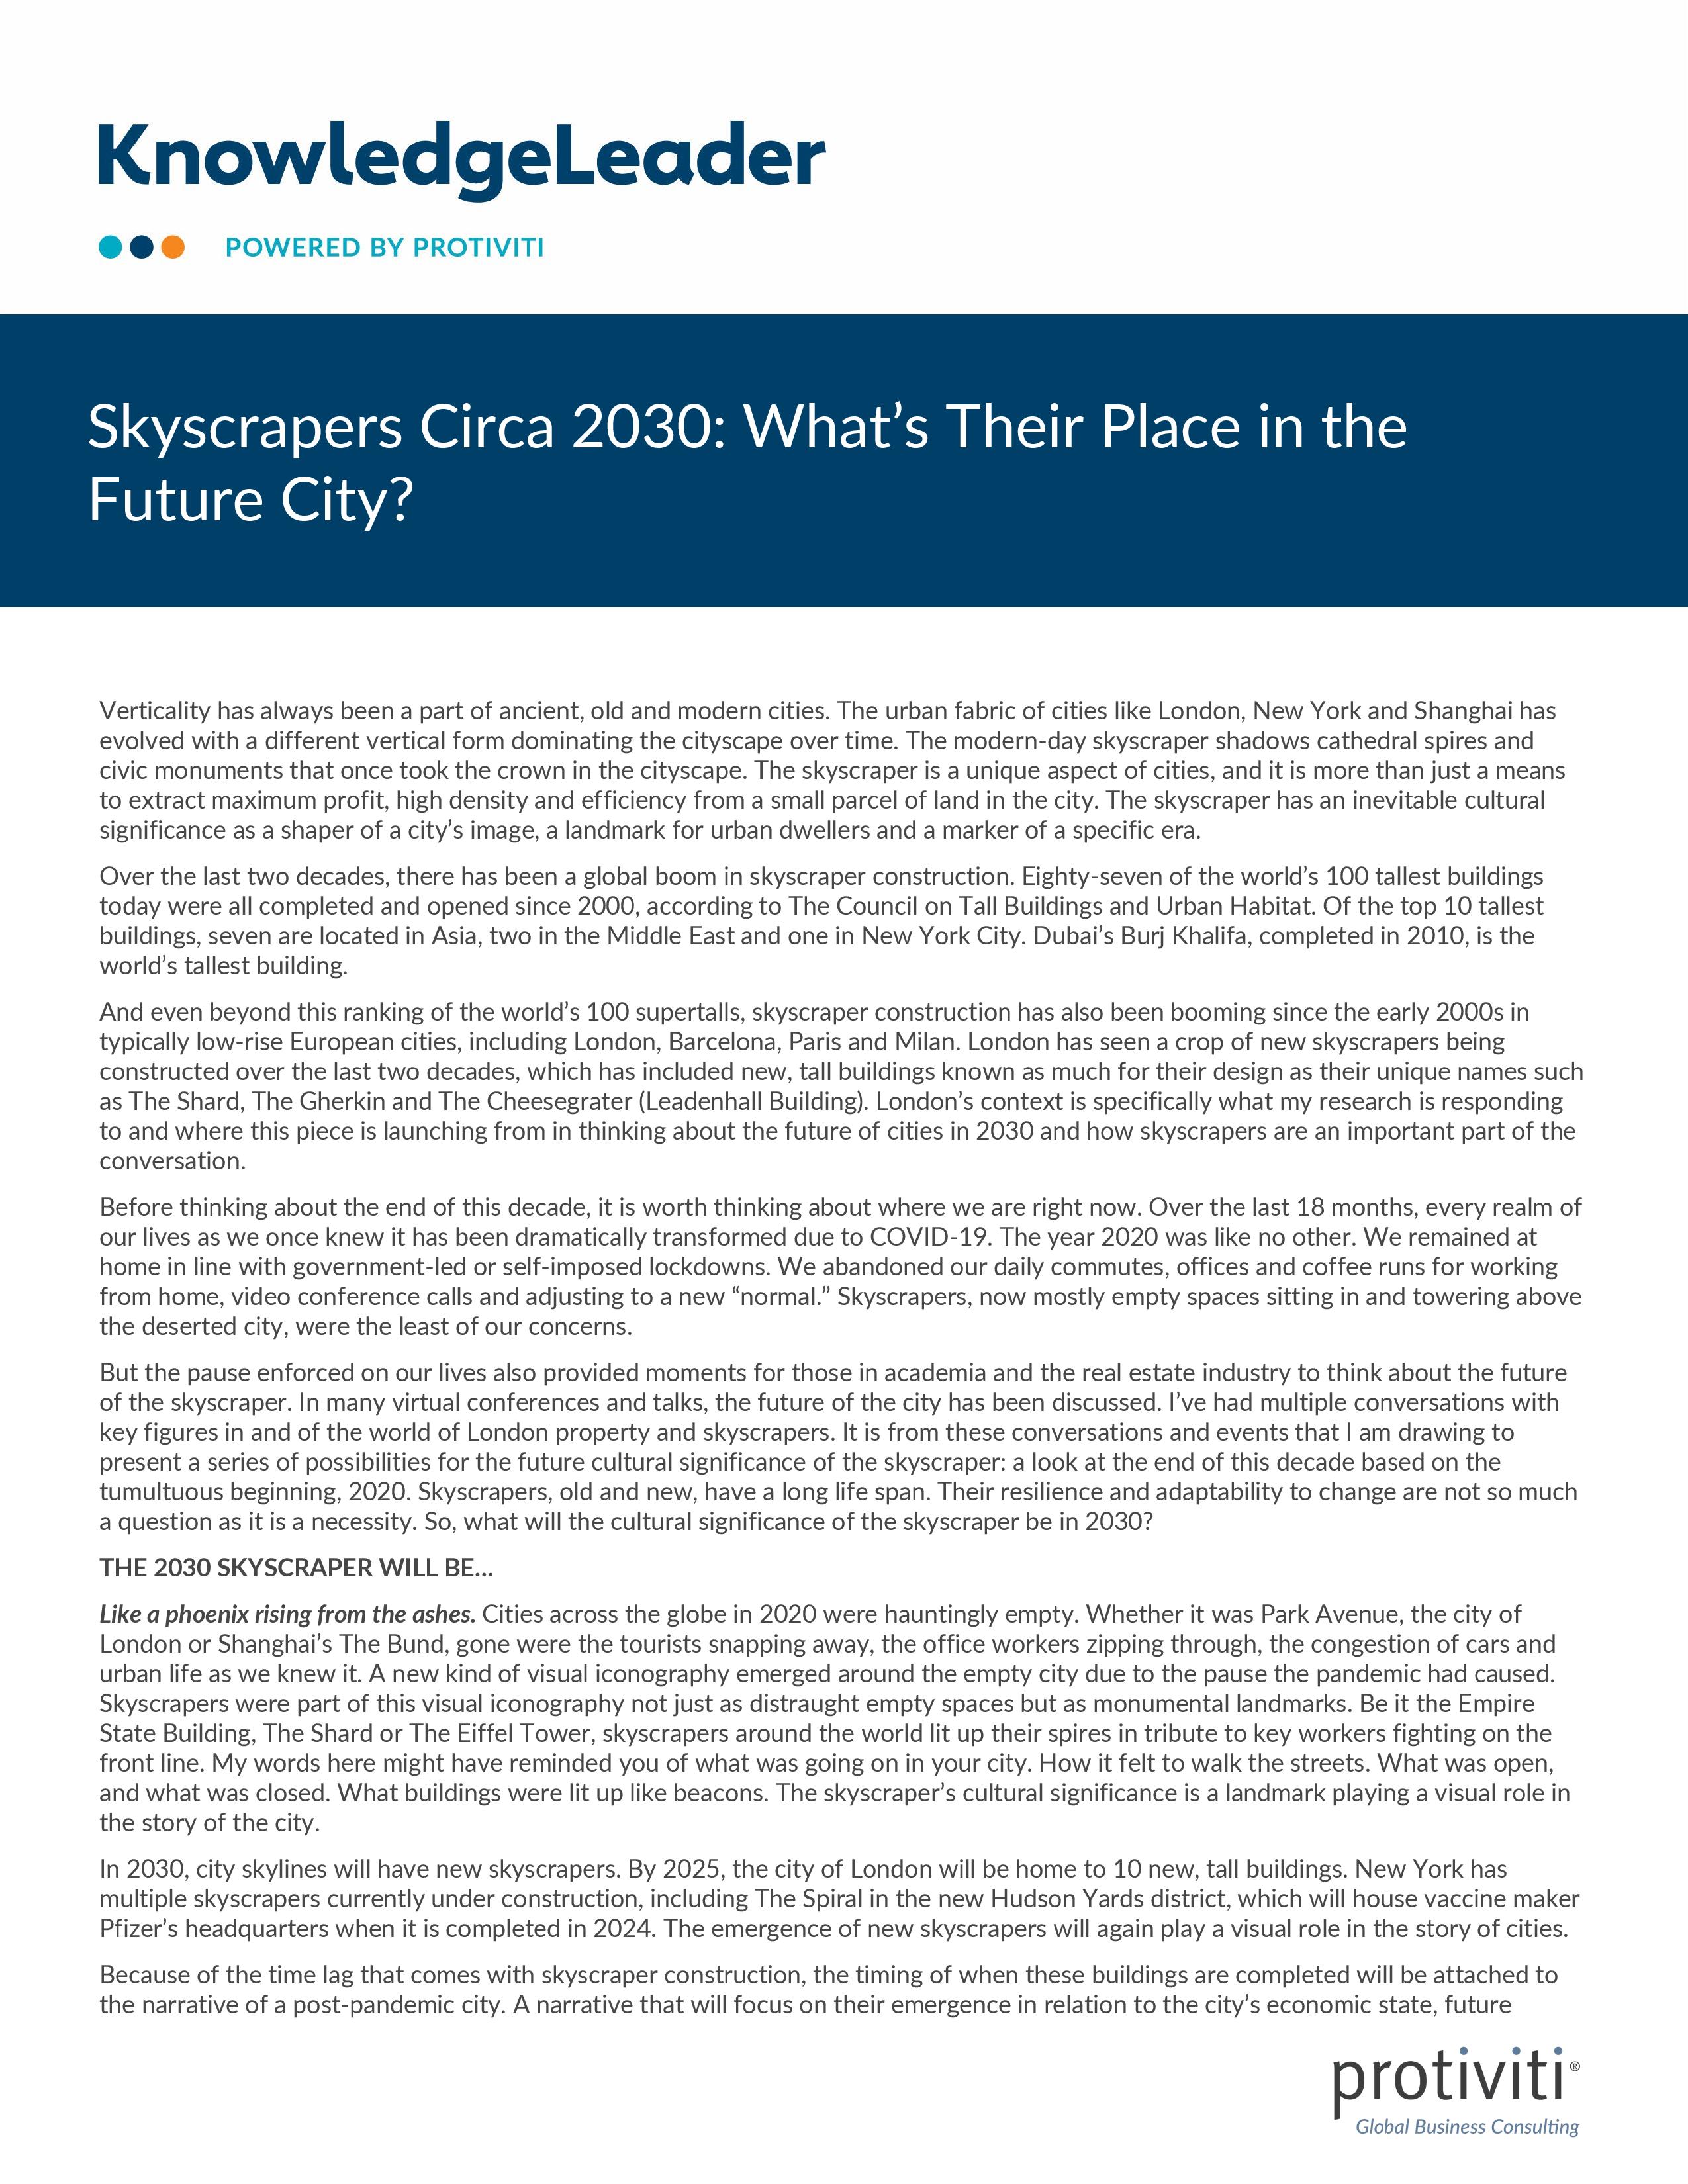 screenshot of the first page of Skyscrapers Circa 2030 What’s Their Place in the Future City